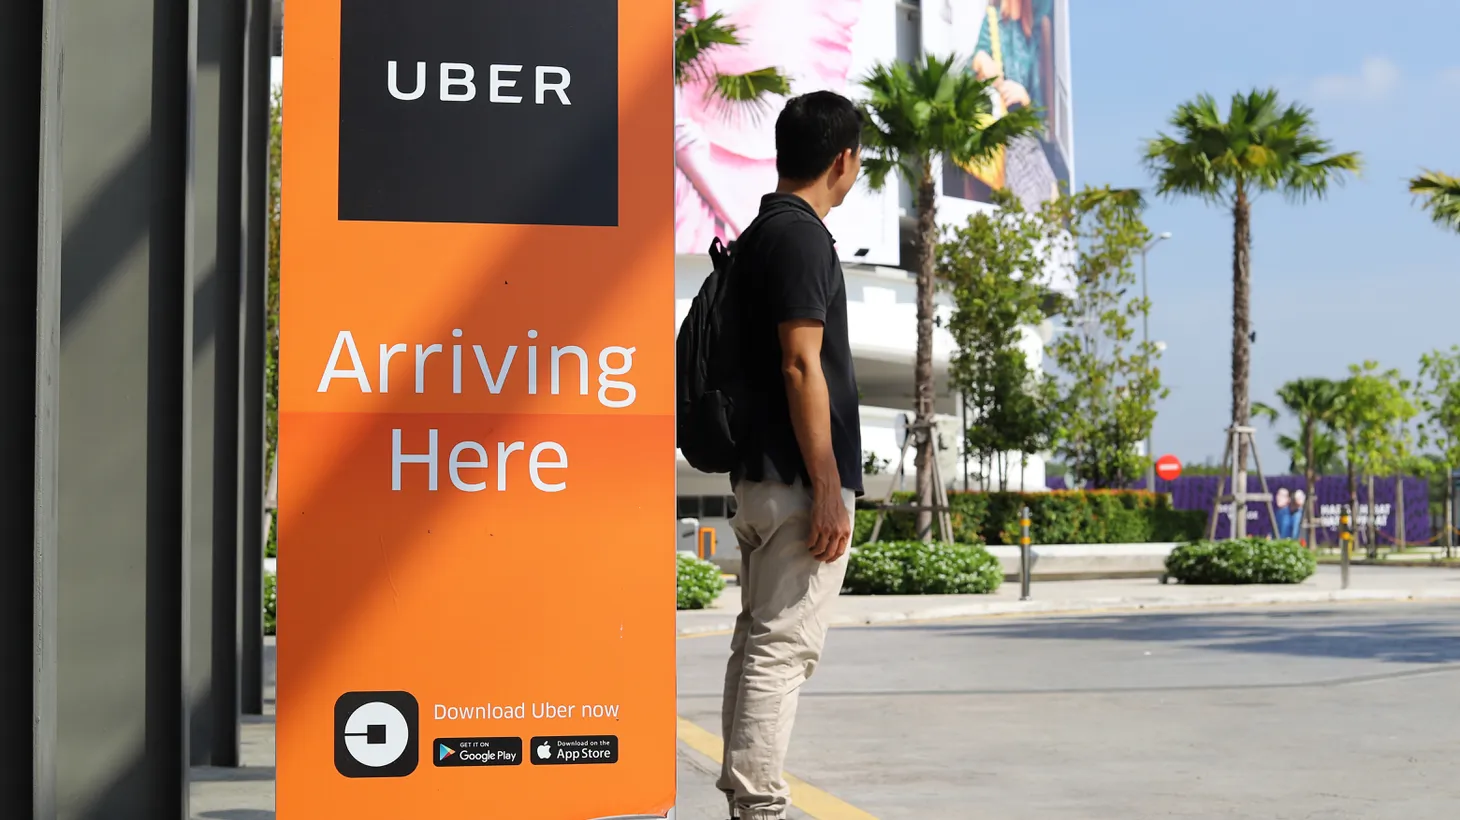 “A lot of tech companies like Uber are changing the way they do business. In short, they used to care about promises and narratives. And now they care about profits,” says Atlantic writer Derek Thompson.